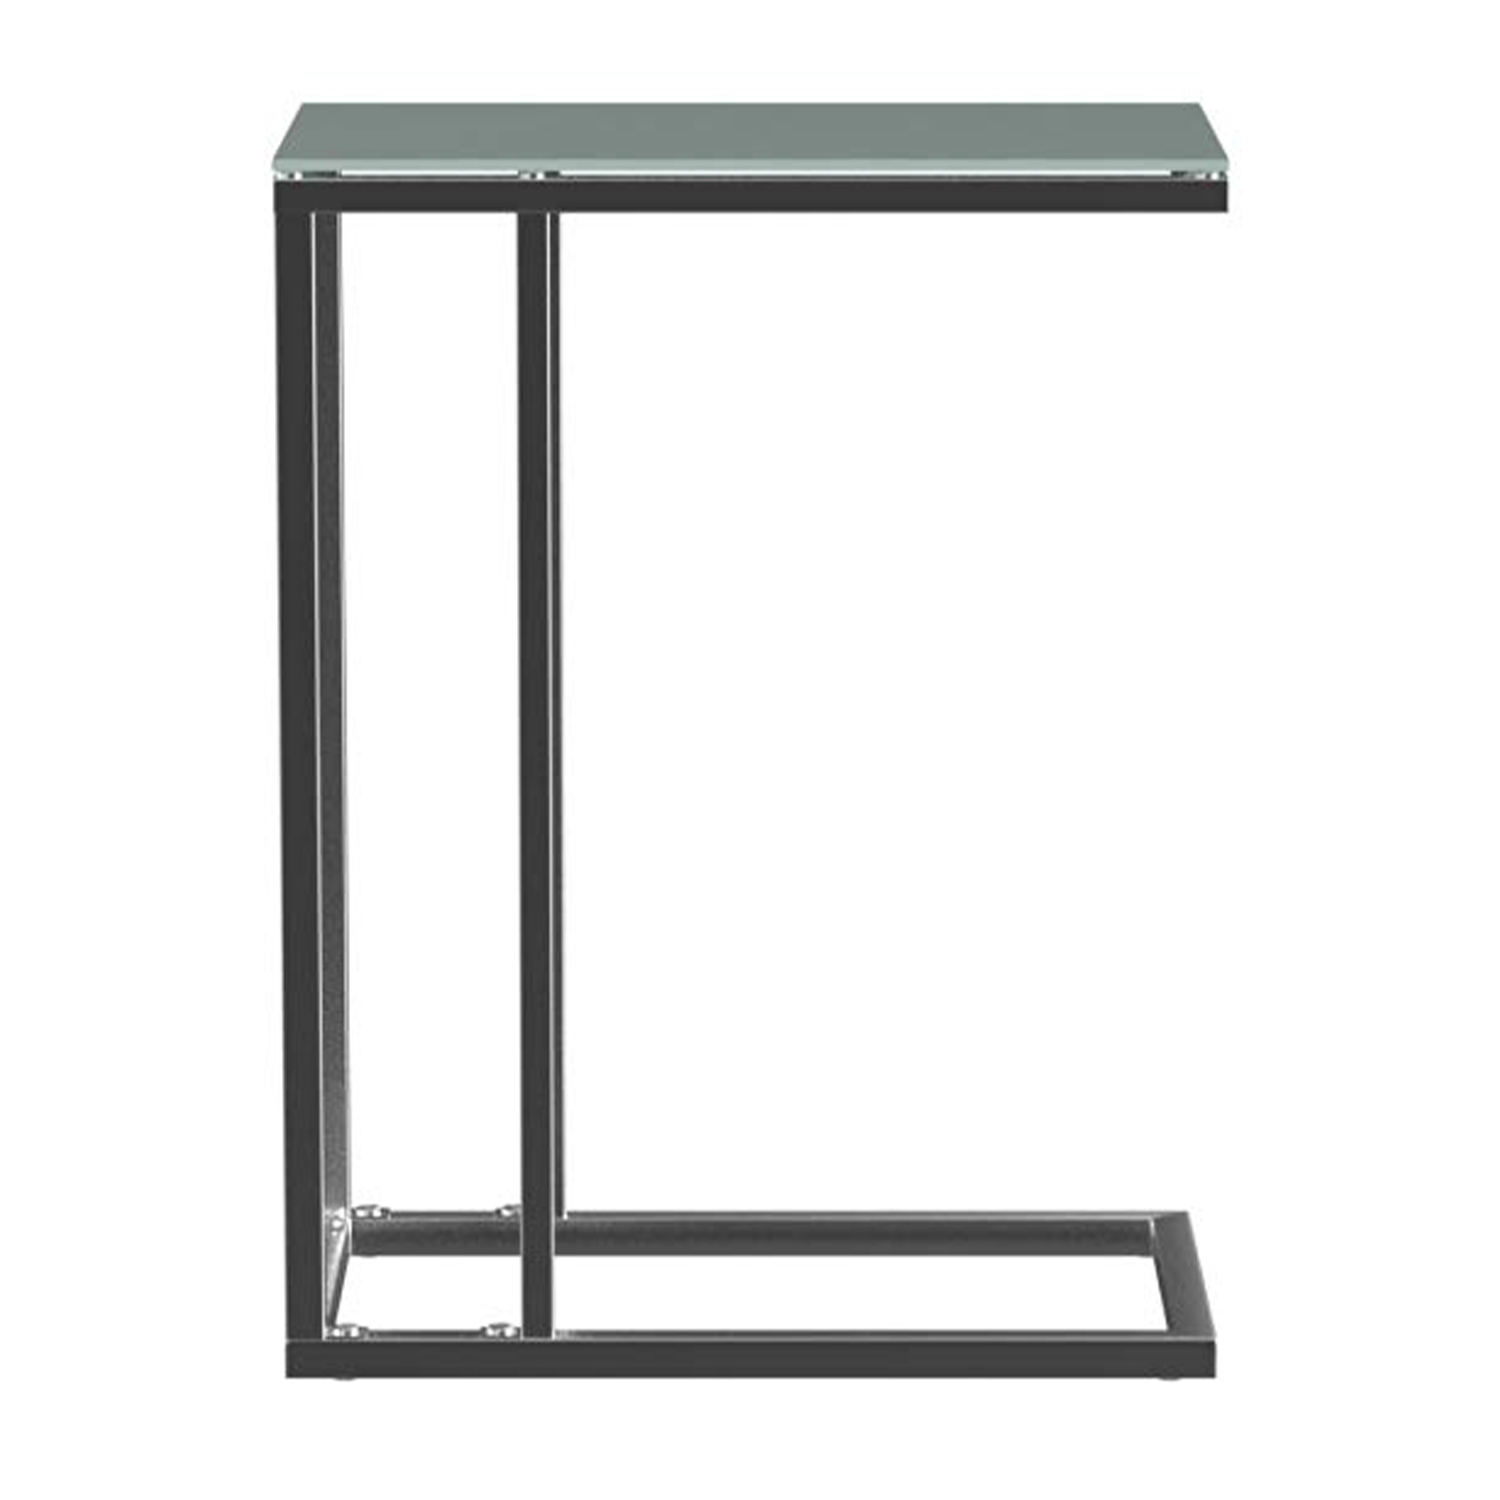 18.25" x 10.25" x 24" Chrome Metal Tempered Glass Accent Table